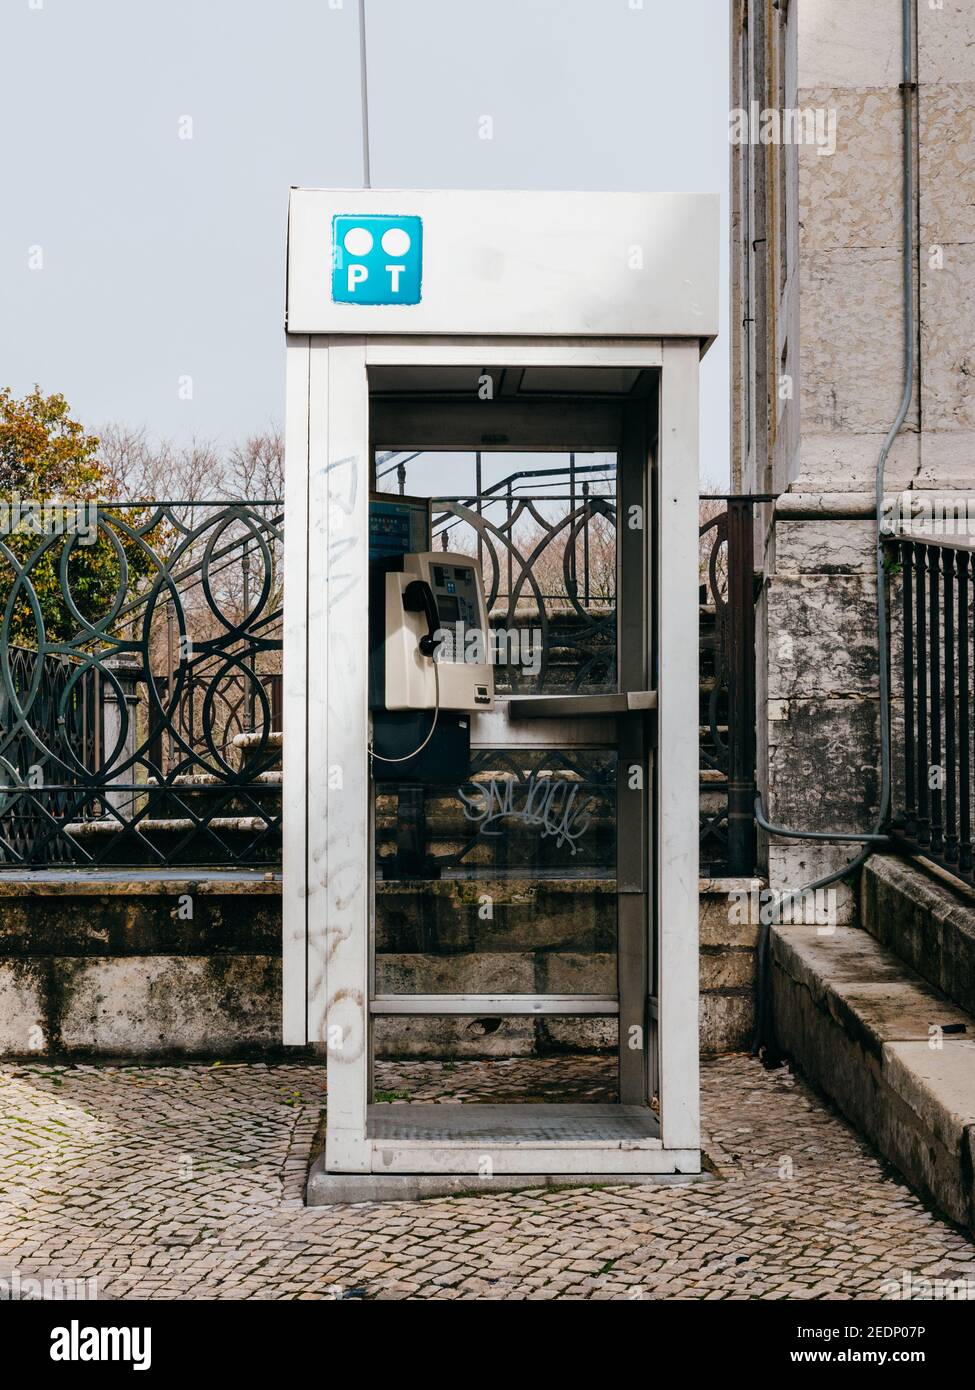 Lisbon, Portugal - Feb 9, 2018: Vintage old PT portugal TElecom phone booth with modern paycard phone inside Stock Photo